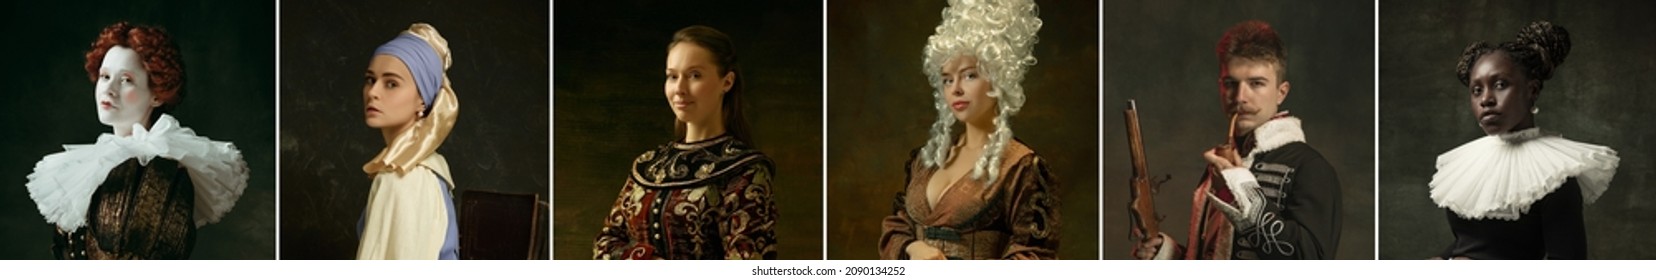 Composed and confident. Medieval people as a royalty persons in vintage clothing on dark background. Concept of comparison of eras, modernity and renaissance, baroque style. Creative collage. Flyer - Shutterstock ID 2090134252